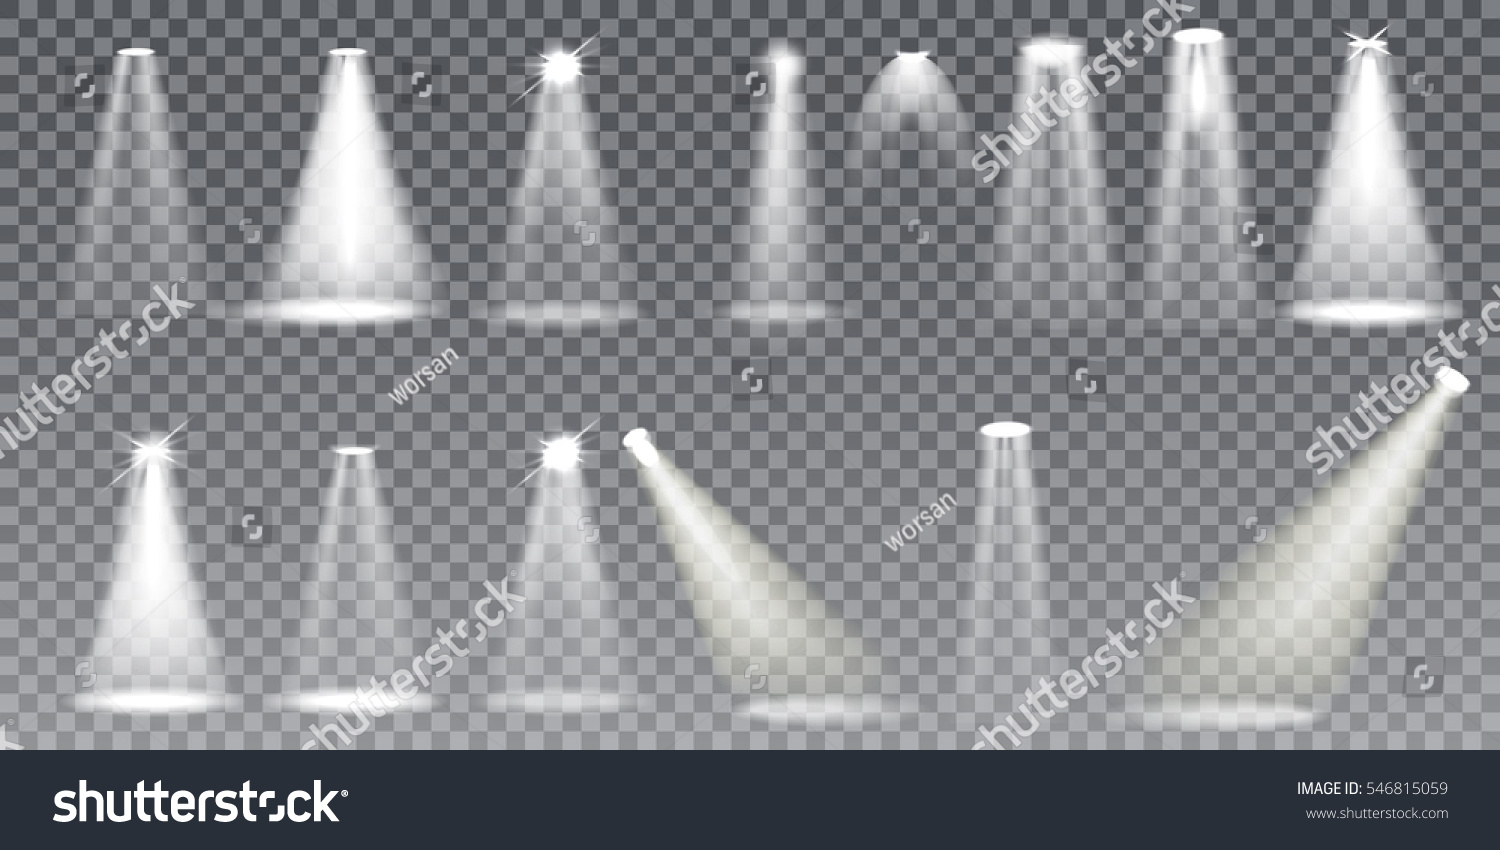 Scene illumination collection, transparent effects. Bright lighting with spotlights. #546815059